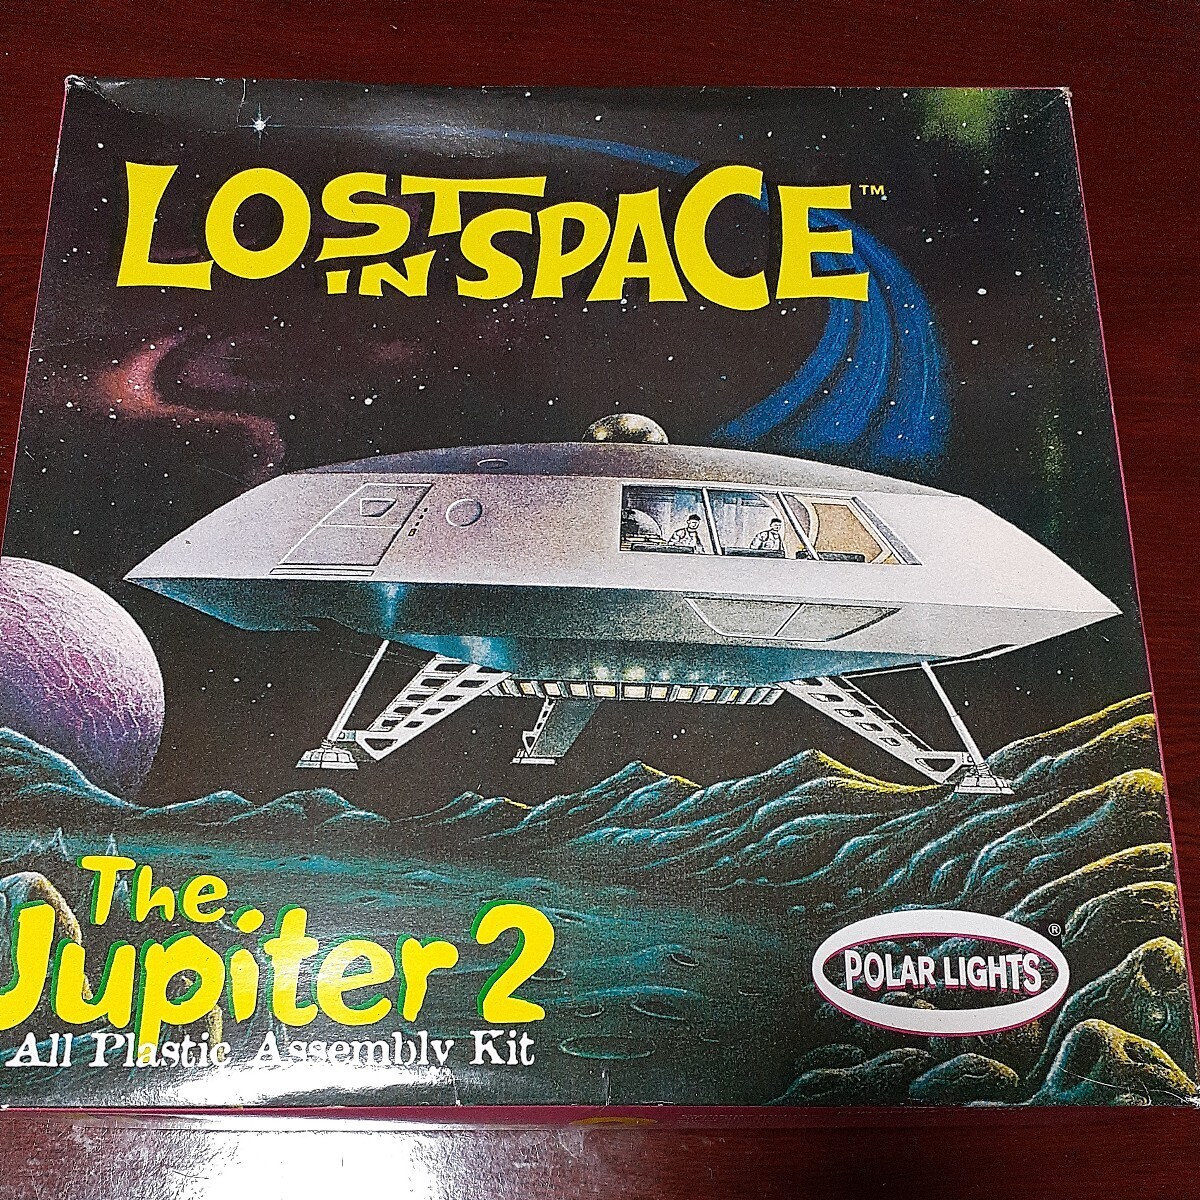 Lost in SpaceクラシックJupiter 2　　　　　　プラスチックモデルアセンブリキット_画像1